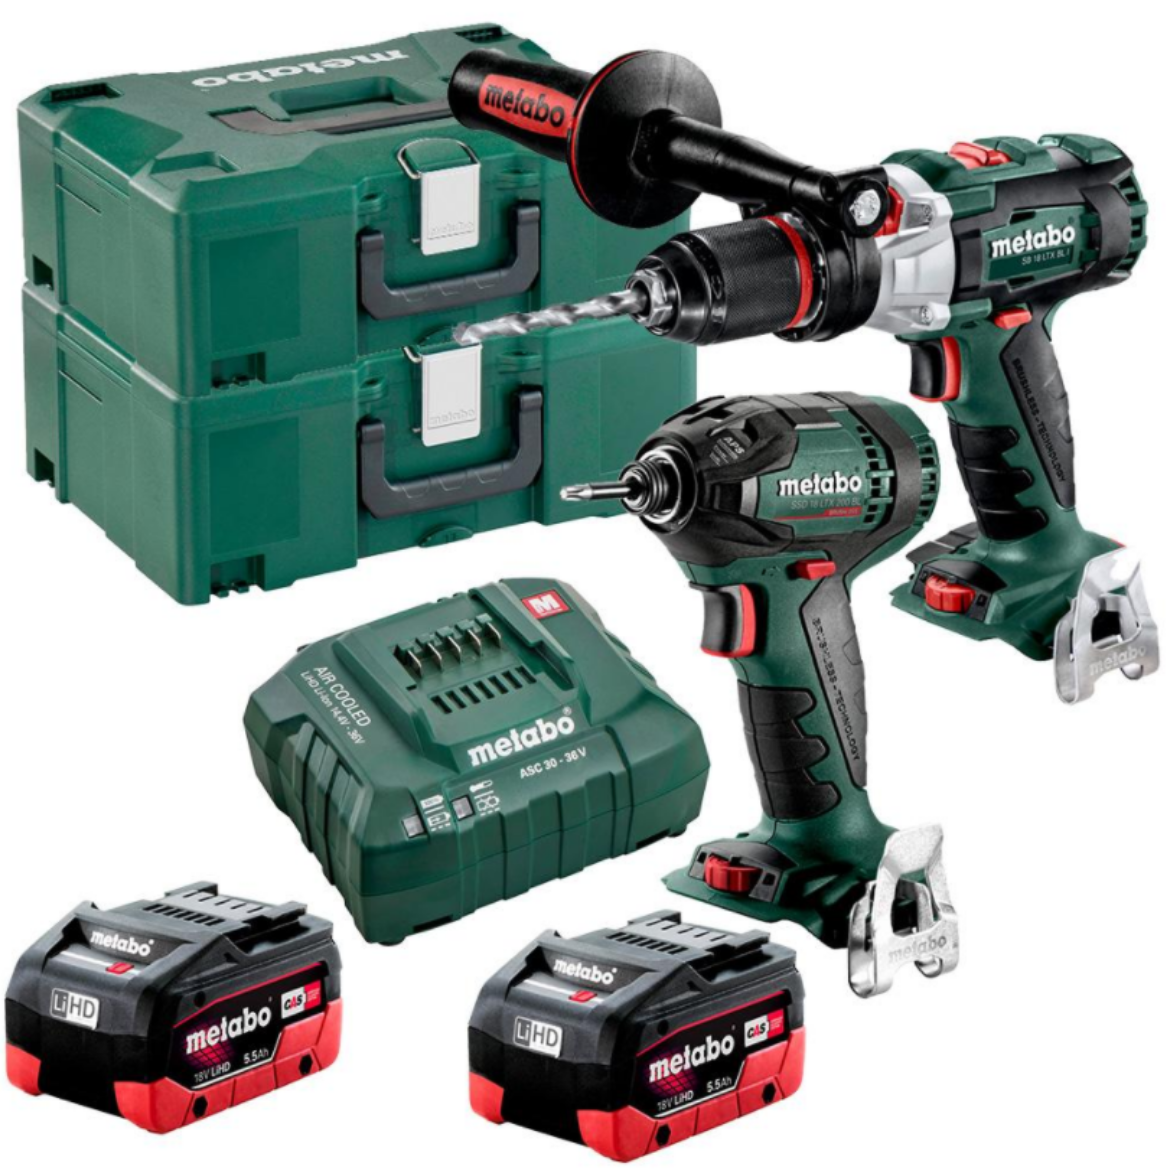 Picture of 18 V BRUSHLESS, HAMMER DRILL/SCREWDRIVE 120 NM +
18 V BRUSHLESS 1/4 IMPACT DRIVER MX TORQUE 200NM 
(2 x 5.5 AH LIHD BATTERY PACKS, ASC 55 V AIR-COOLED CHARGER, 2 x METALOC II CASES)